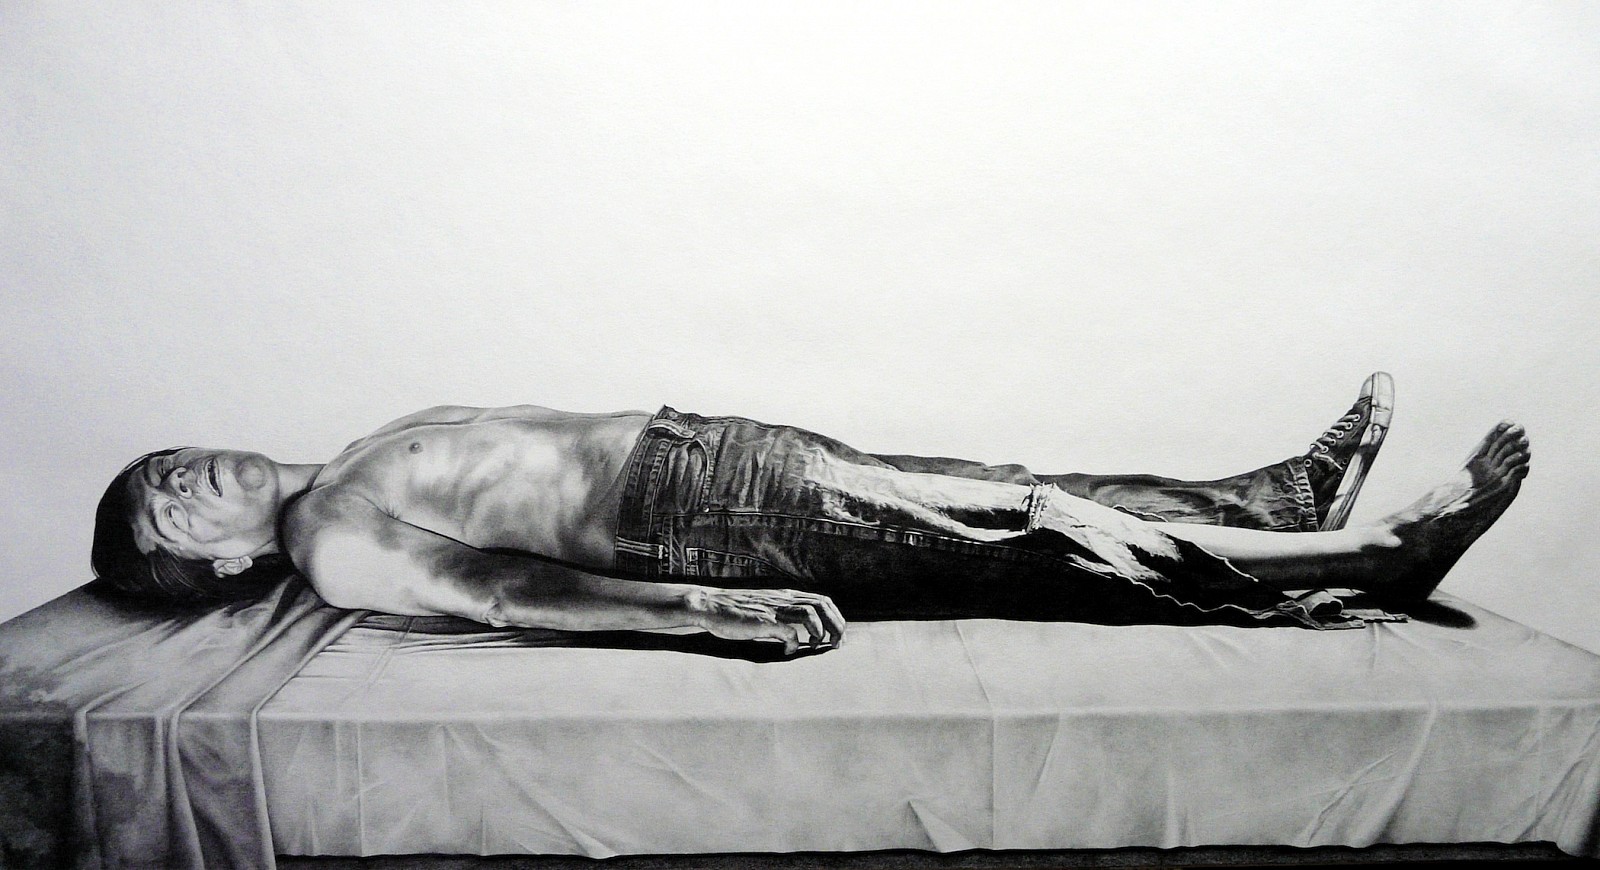 Román Miranda
From Holbein and Bravo to Juan Soldado, 2009
pencil on paper, 42 x 79 in.